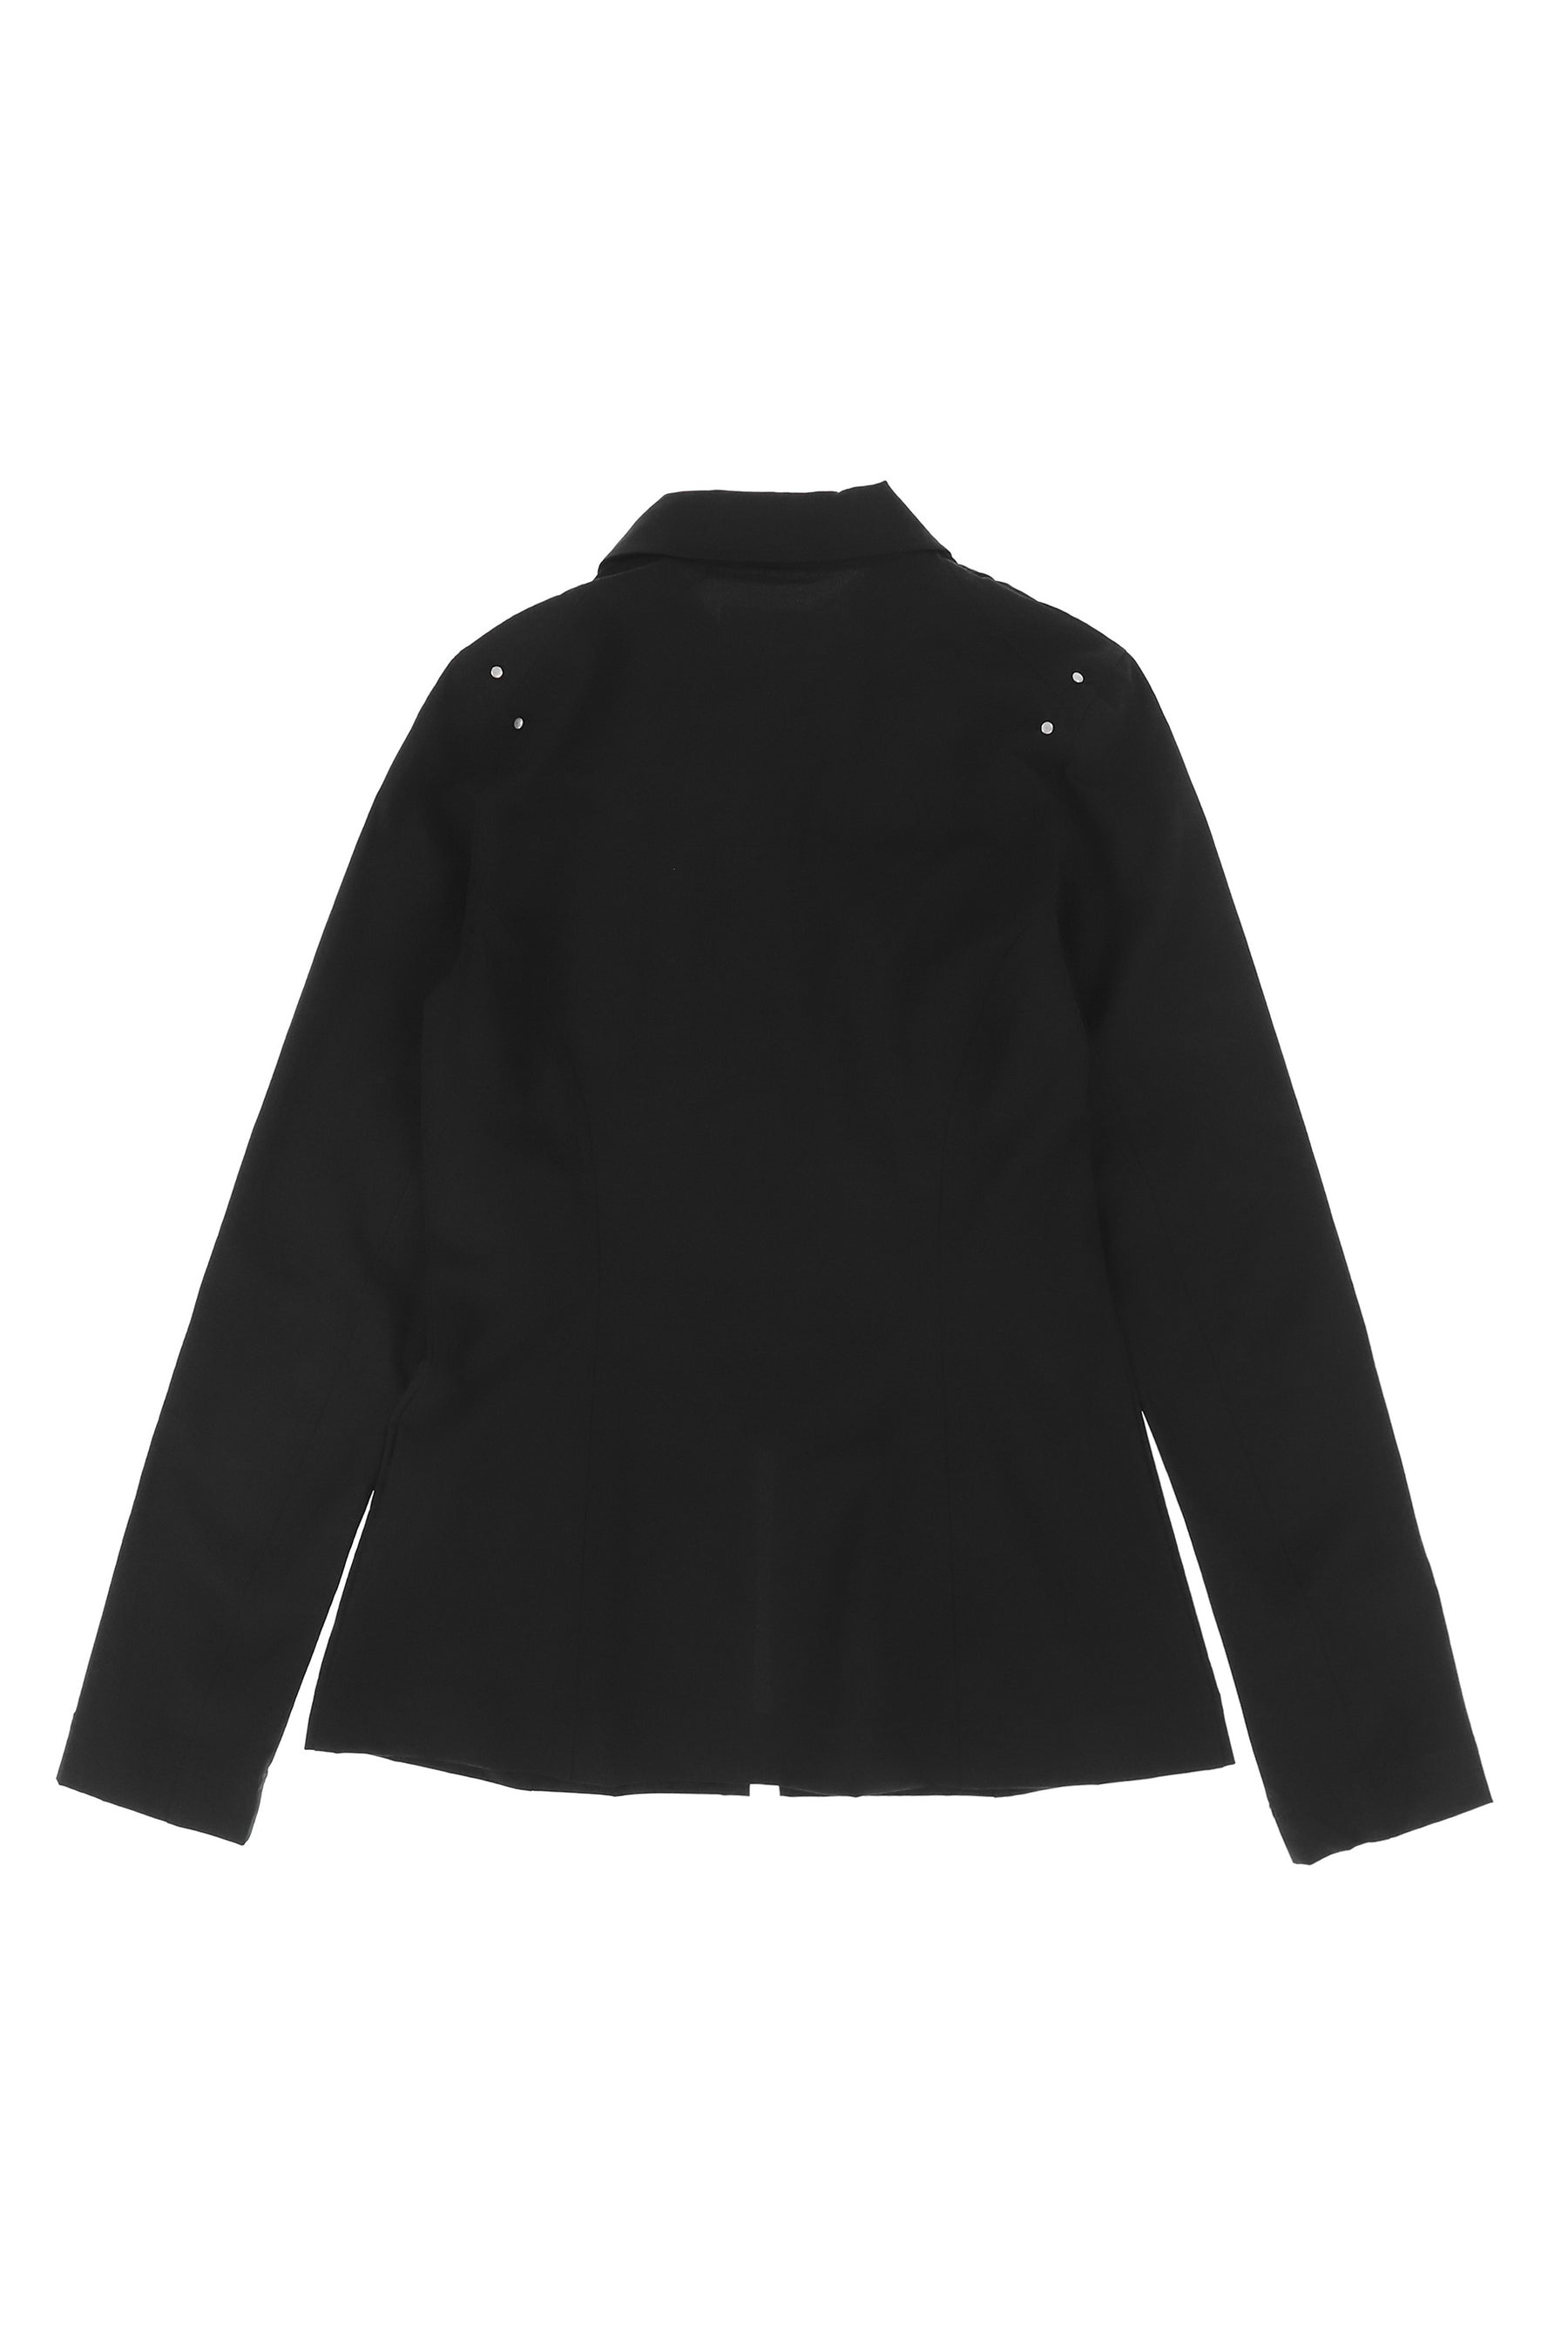 AFFINITY TECHNICAL TAILORED BLAZER / BLK - 2